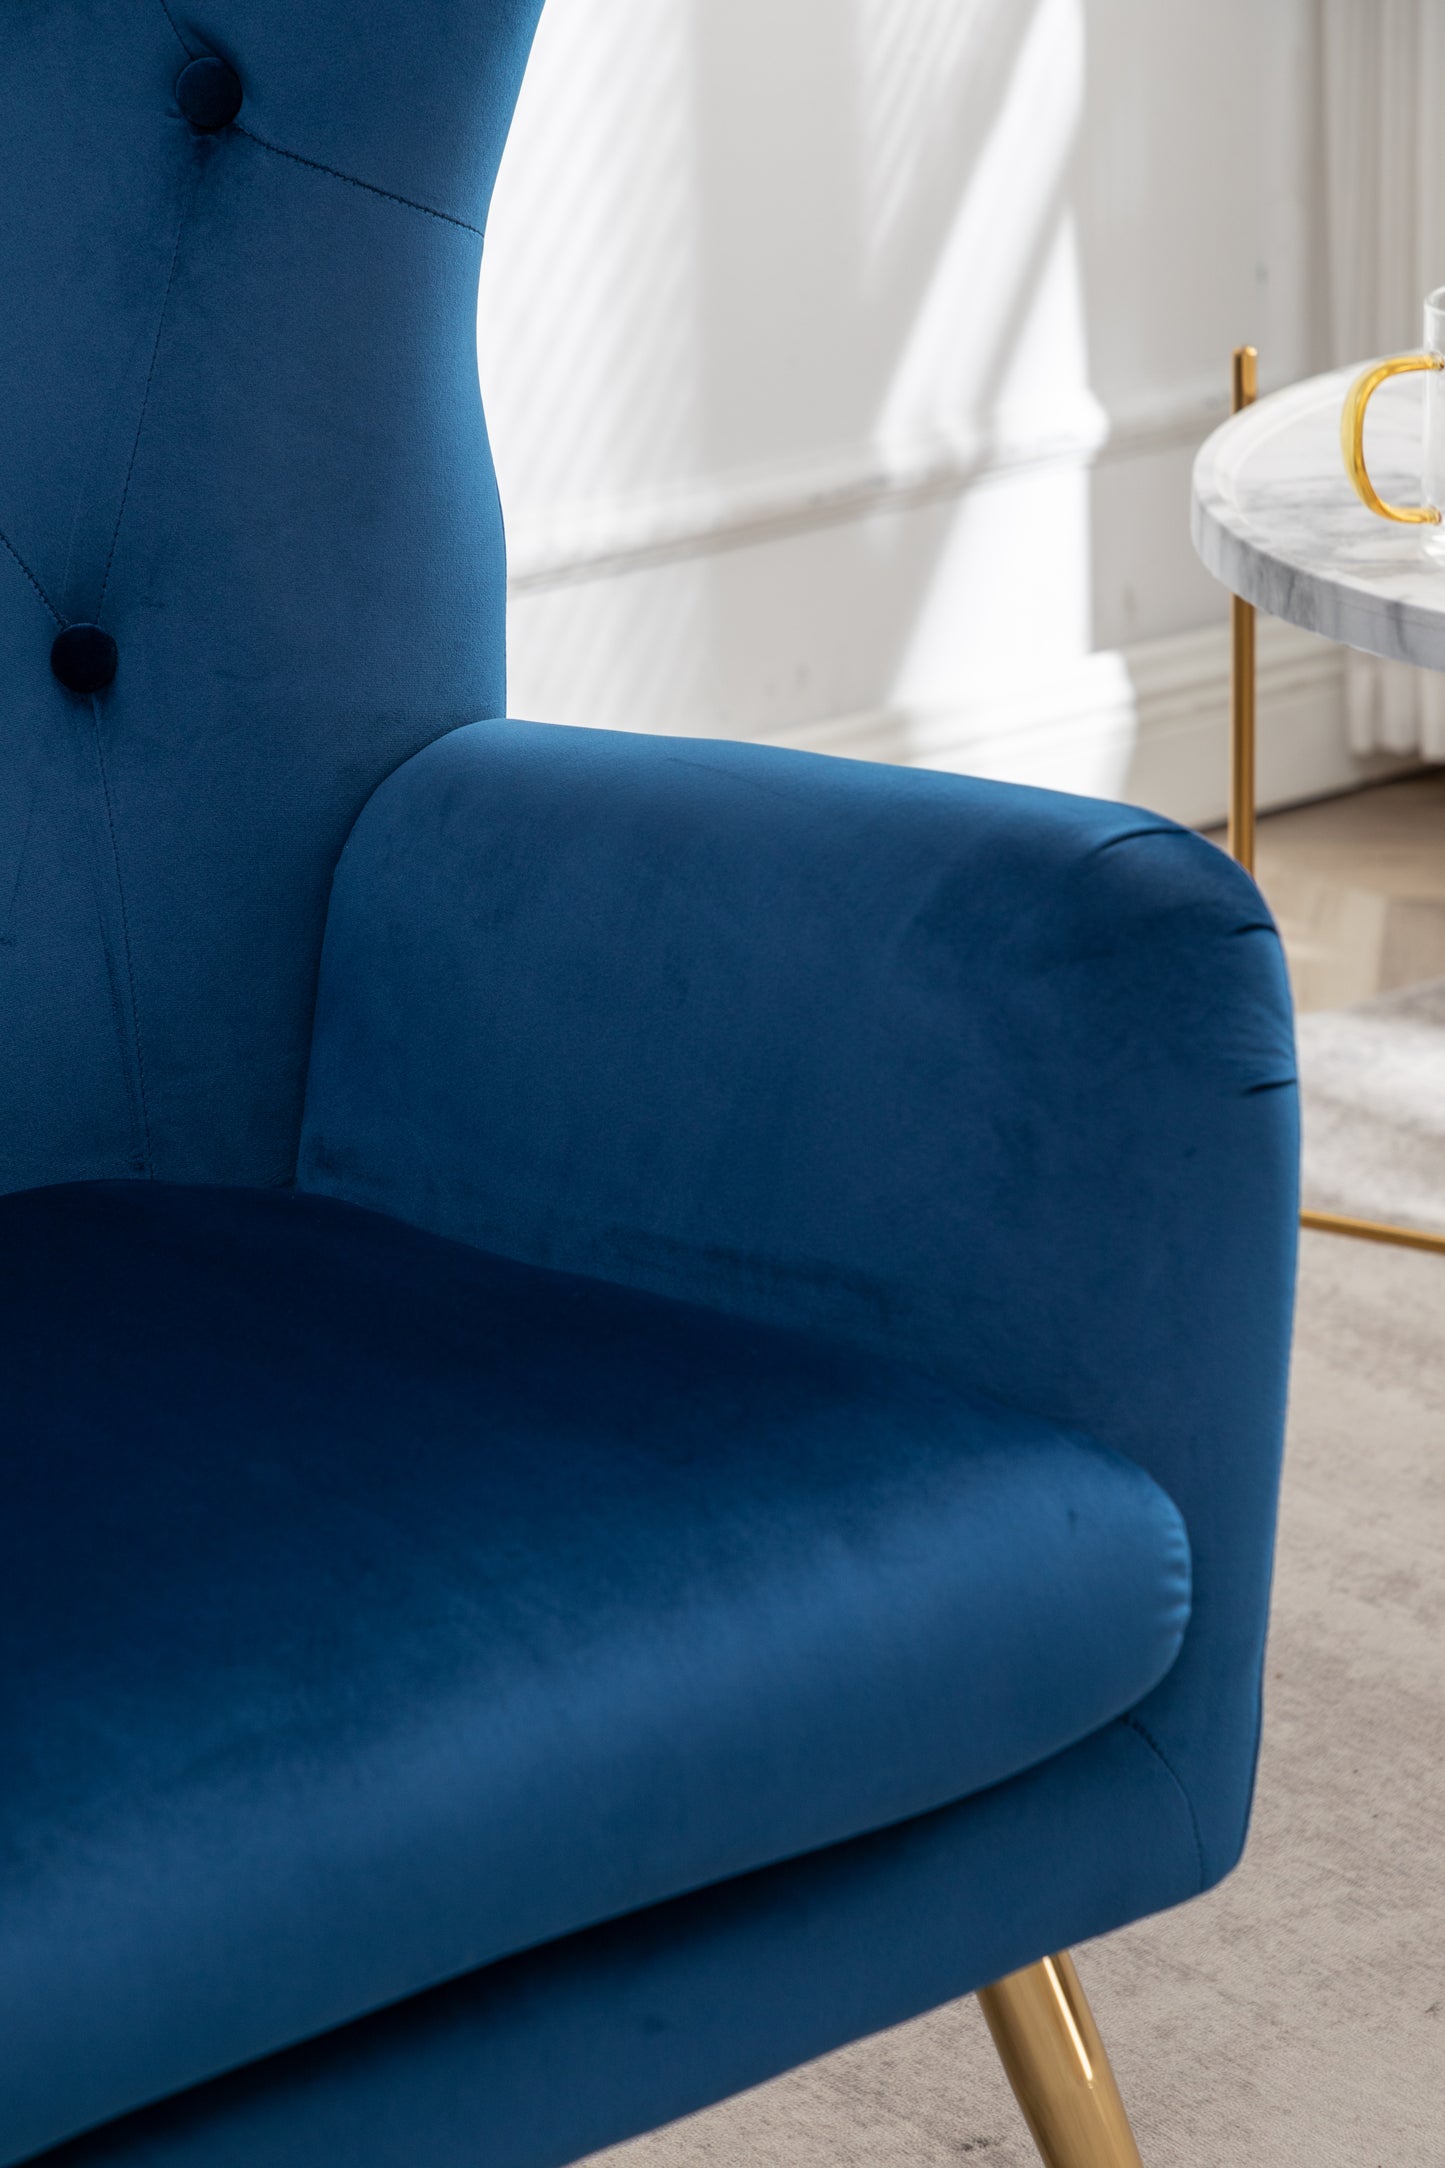 Roundhill Furniture Sovarol Velvet Button-Tufted Wing Back Accent Chair, Blue